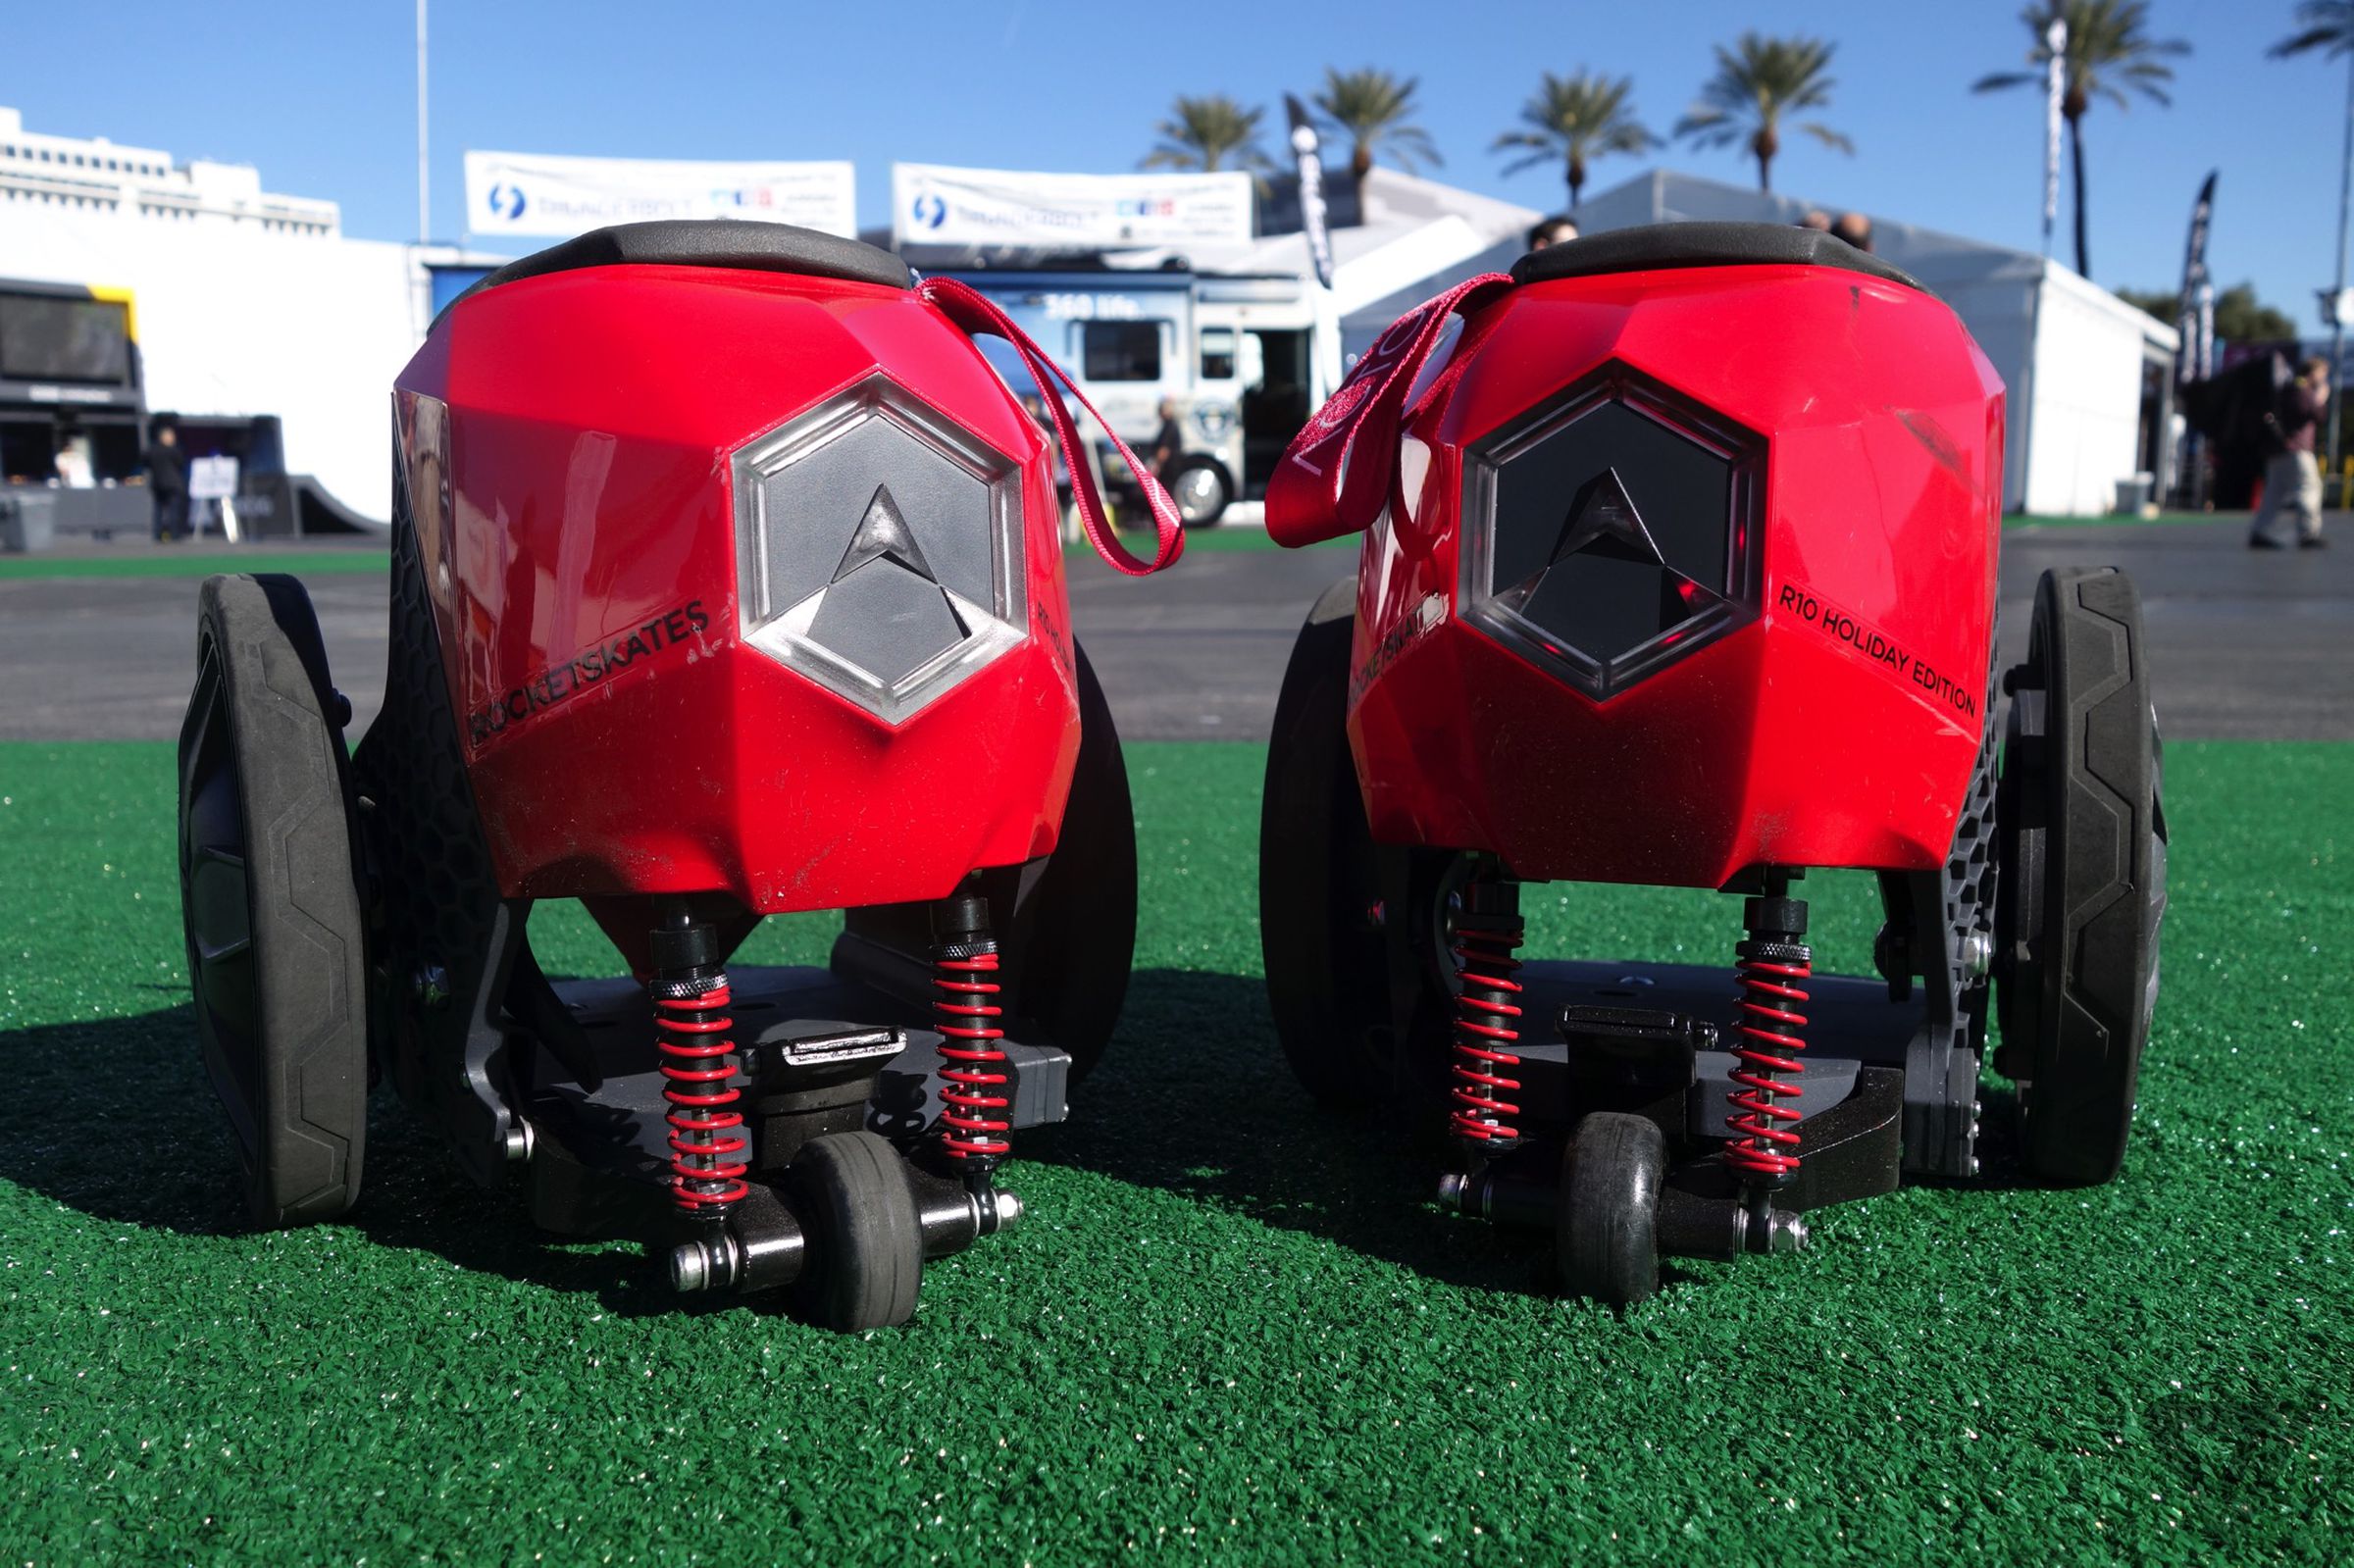 RocketSkates hands-on pictures at CES 2015